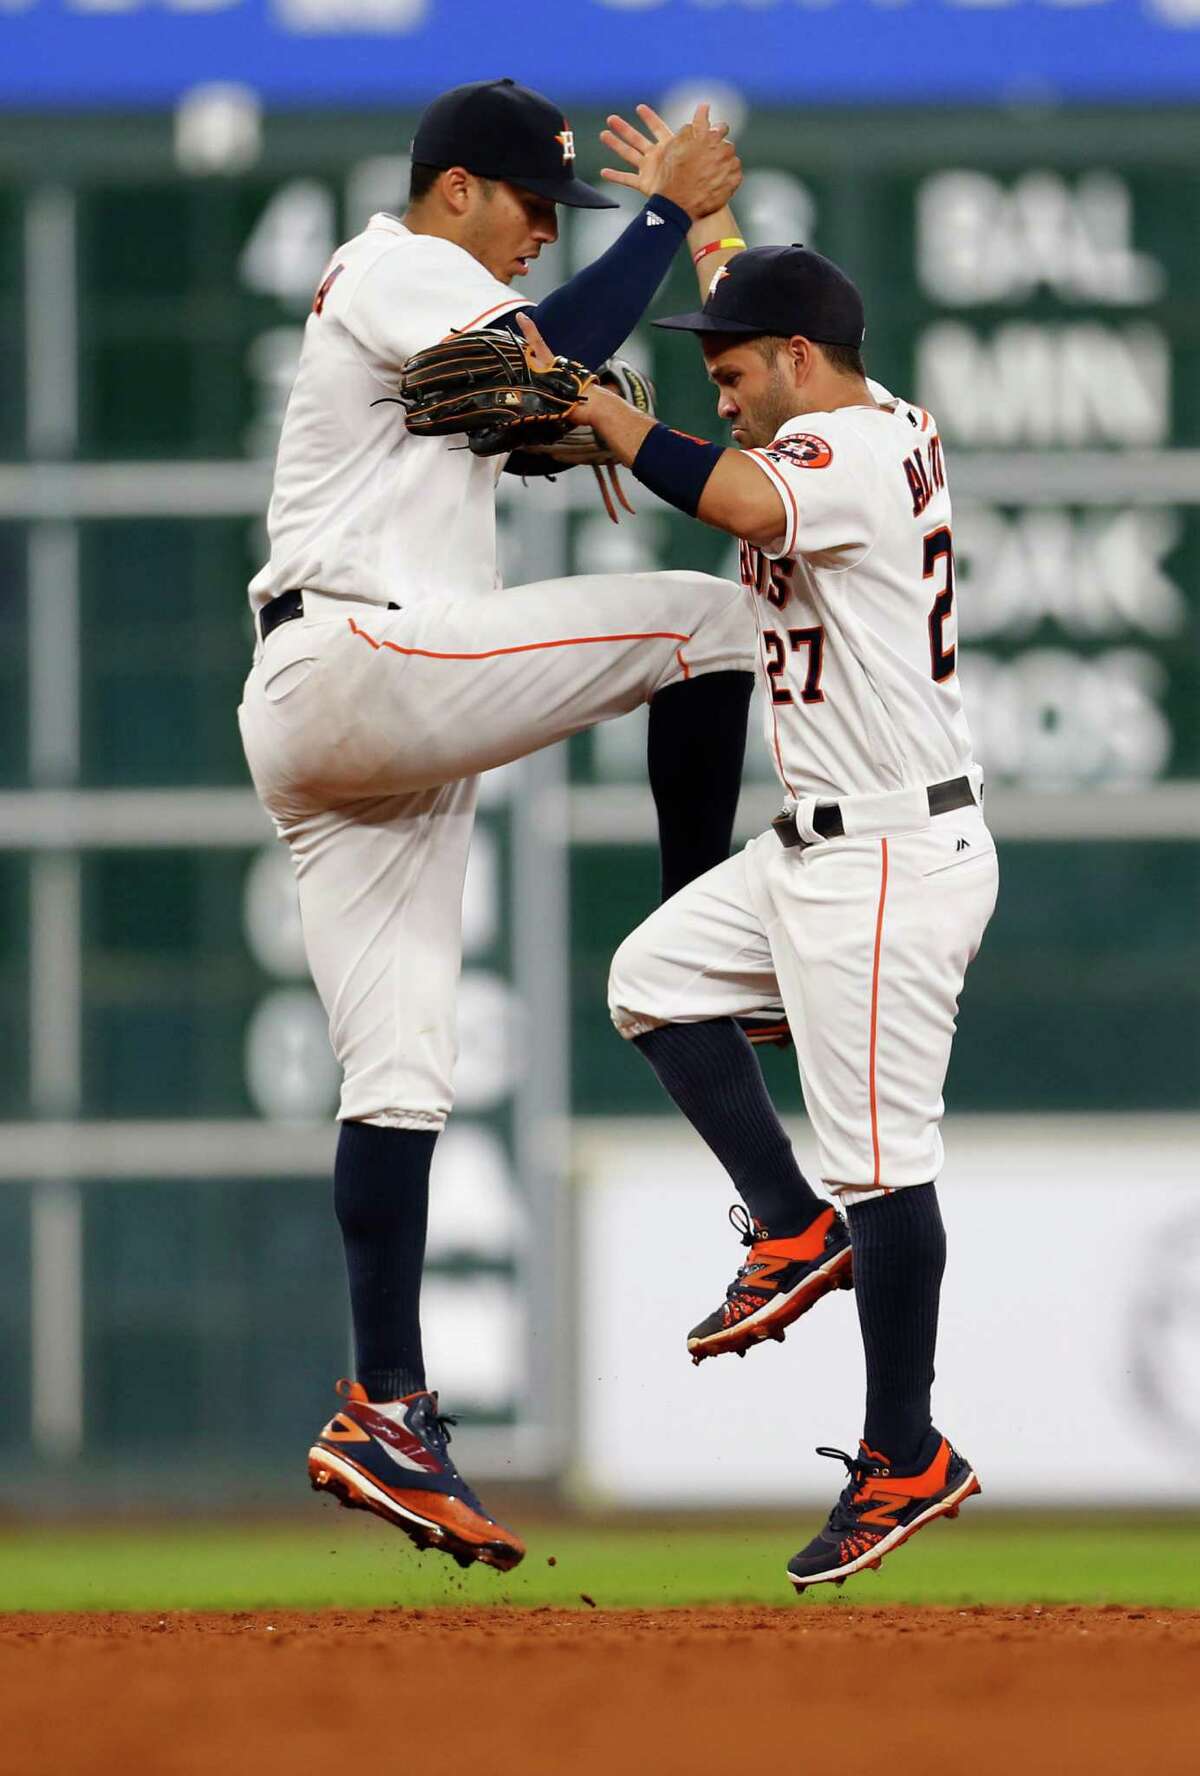 Halfway through the season, Astros shortstop Carlos Correa, left, has driven in a team-high 51 runs. Many of those RBIs helped second baseman Jose Altuve score a team-best 62 times.